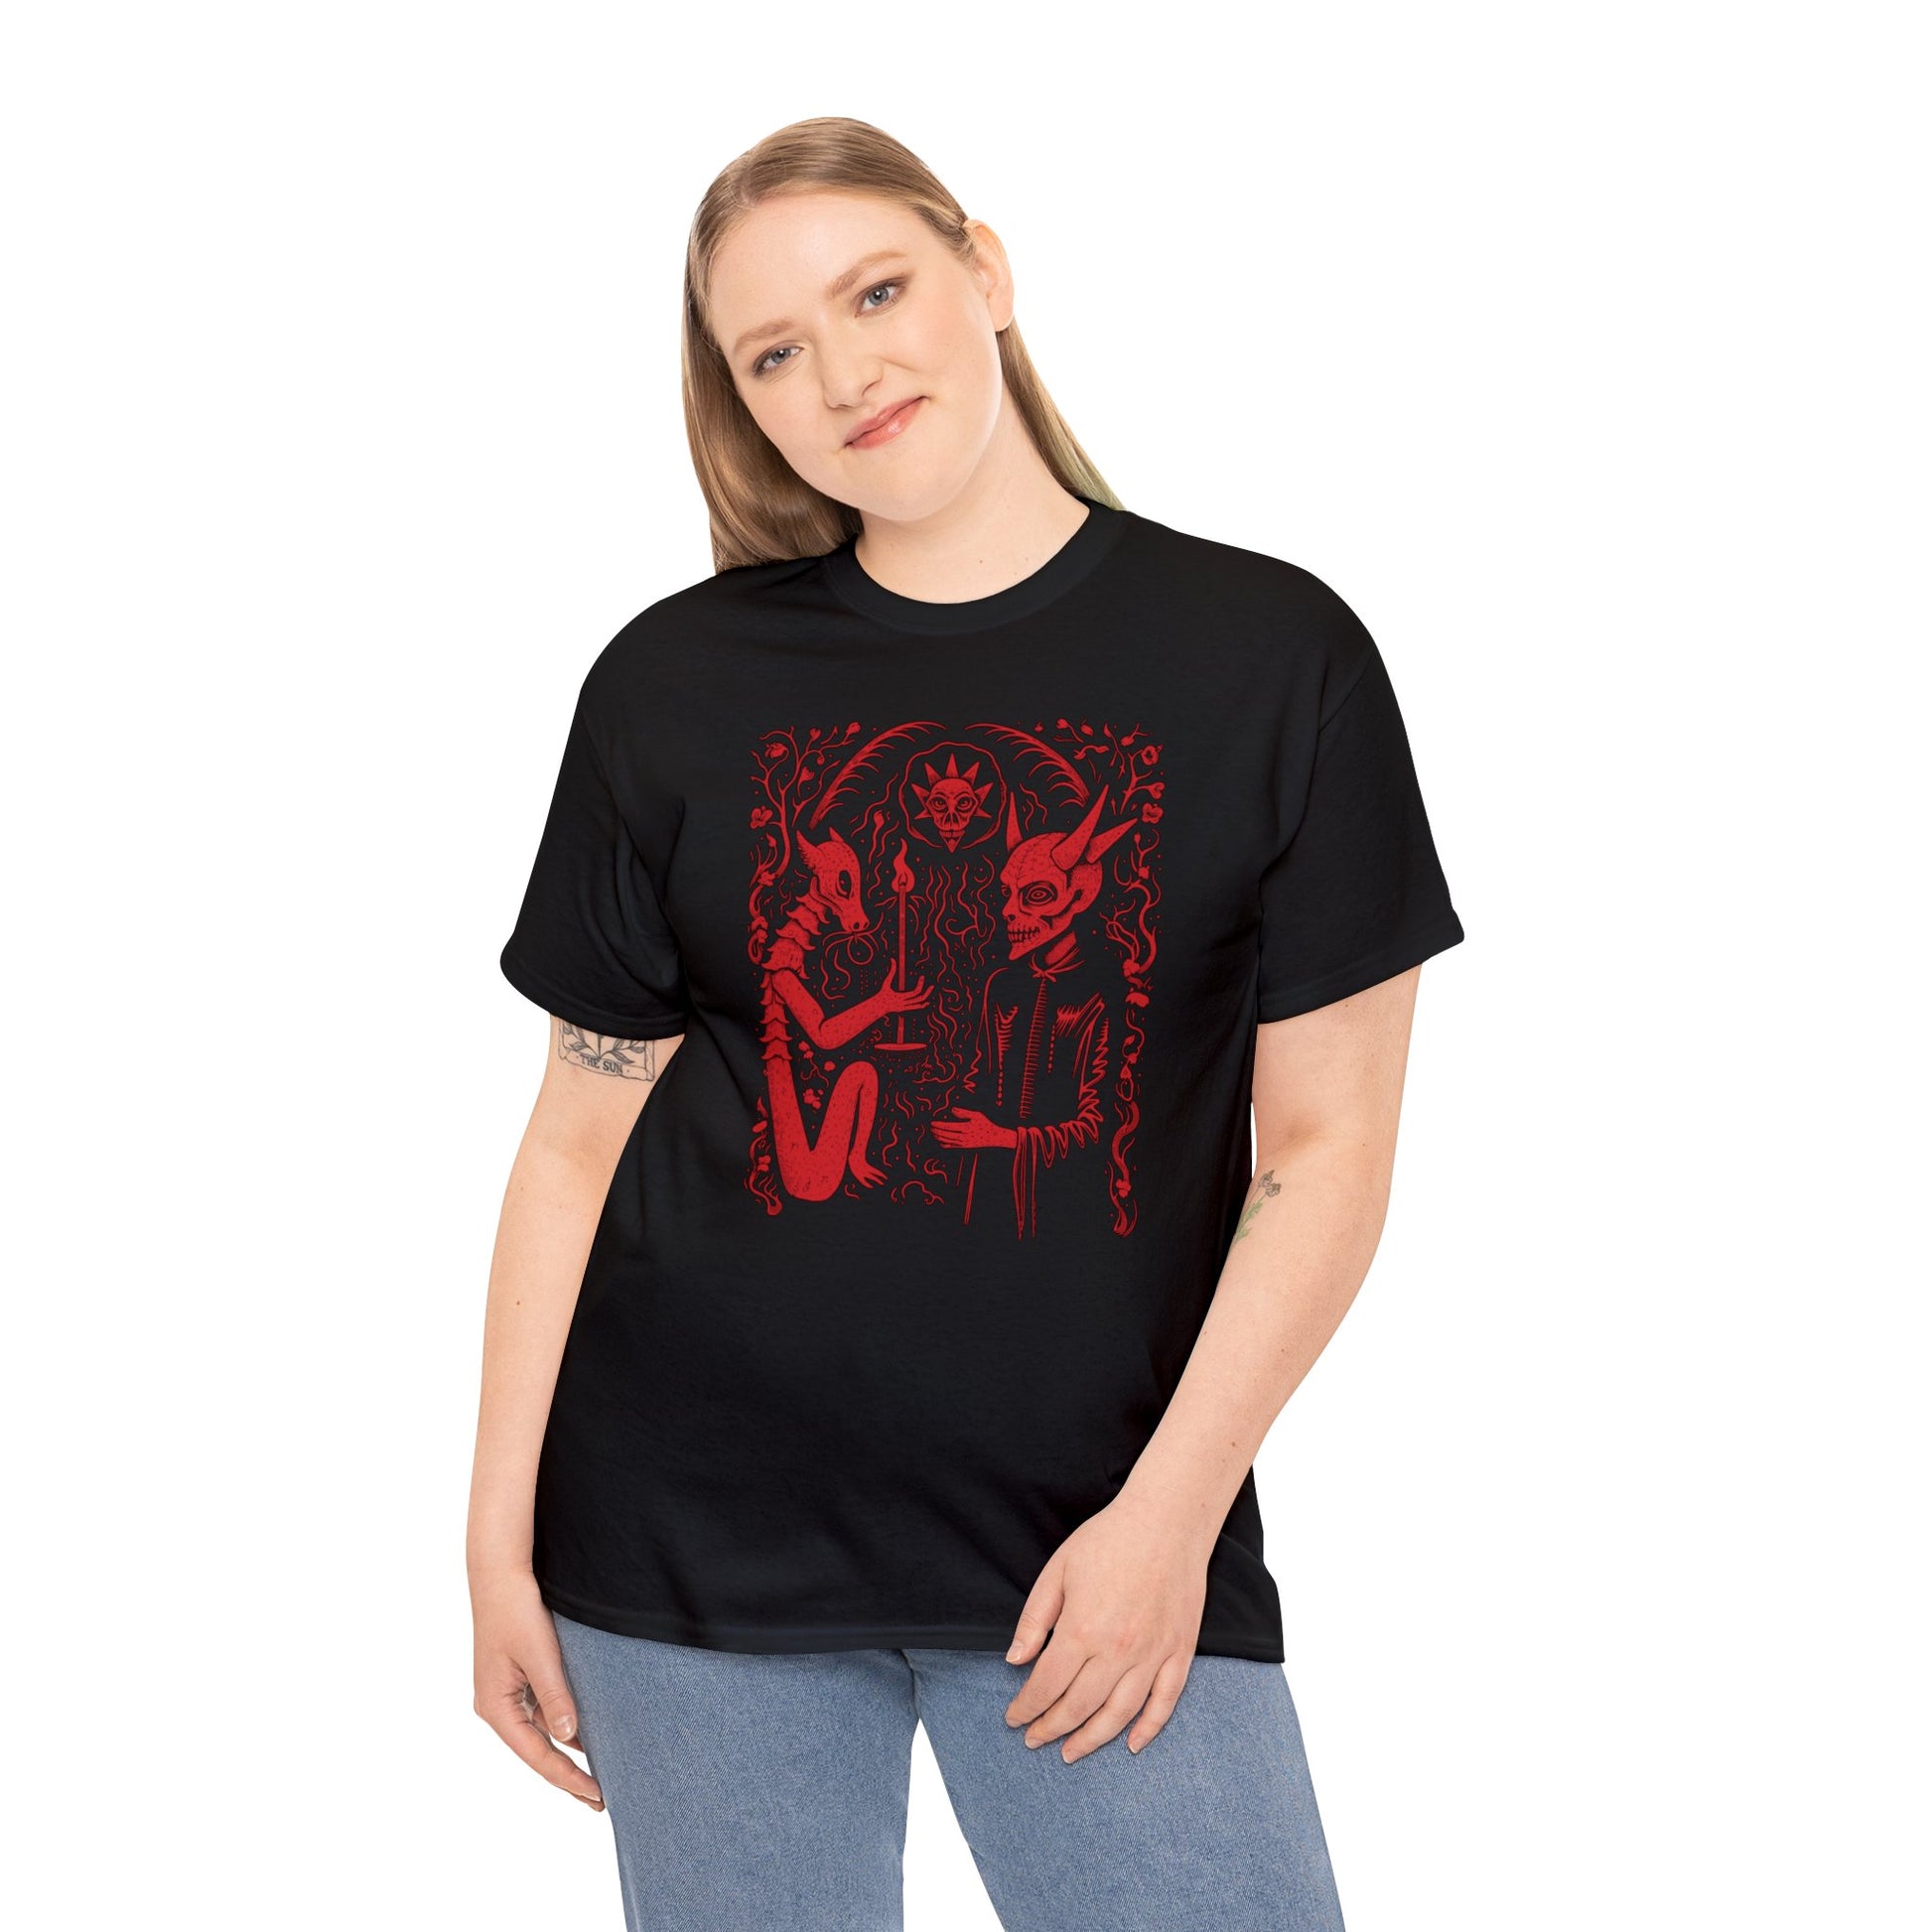 Unisex T-shirt Pact with the Devil in Red - Frogos Design